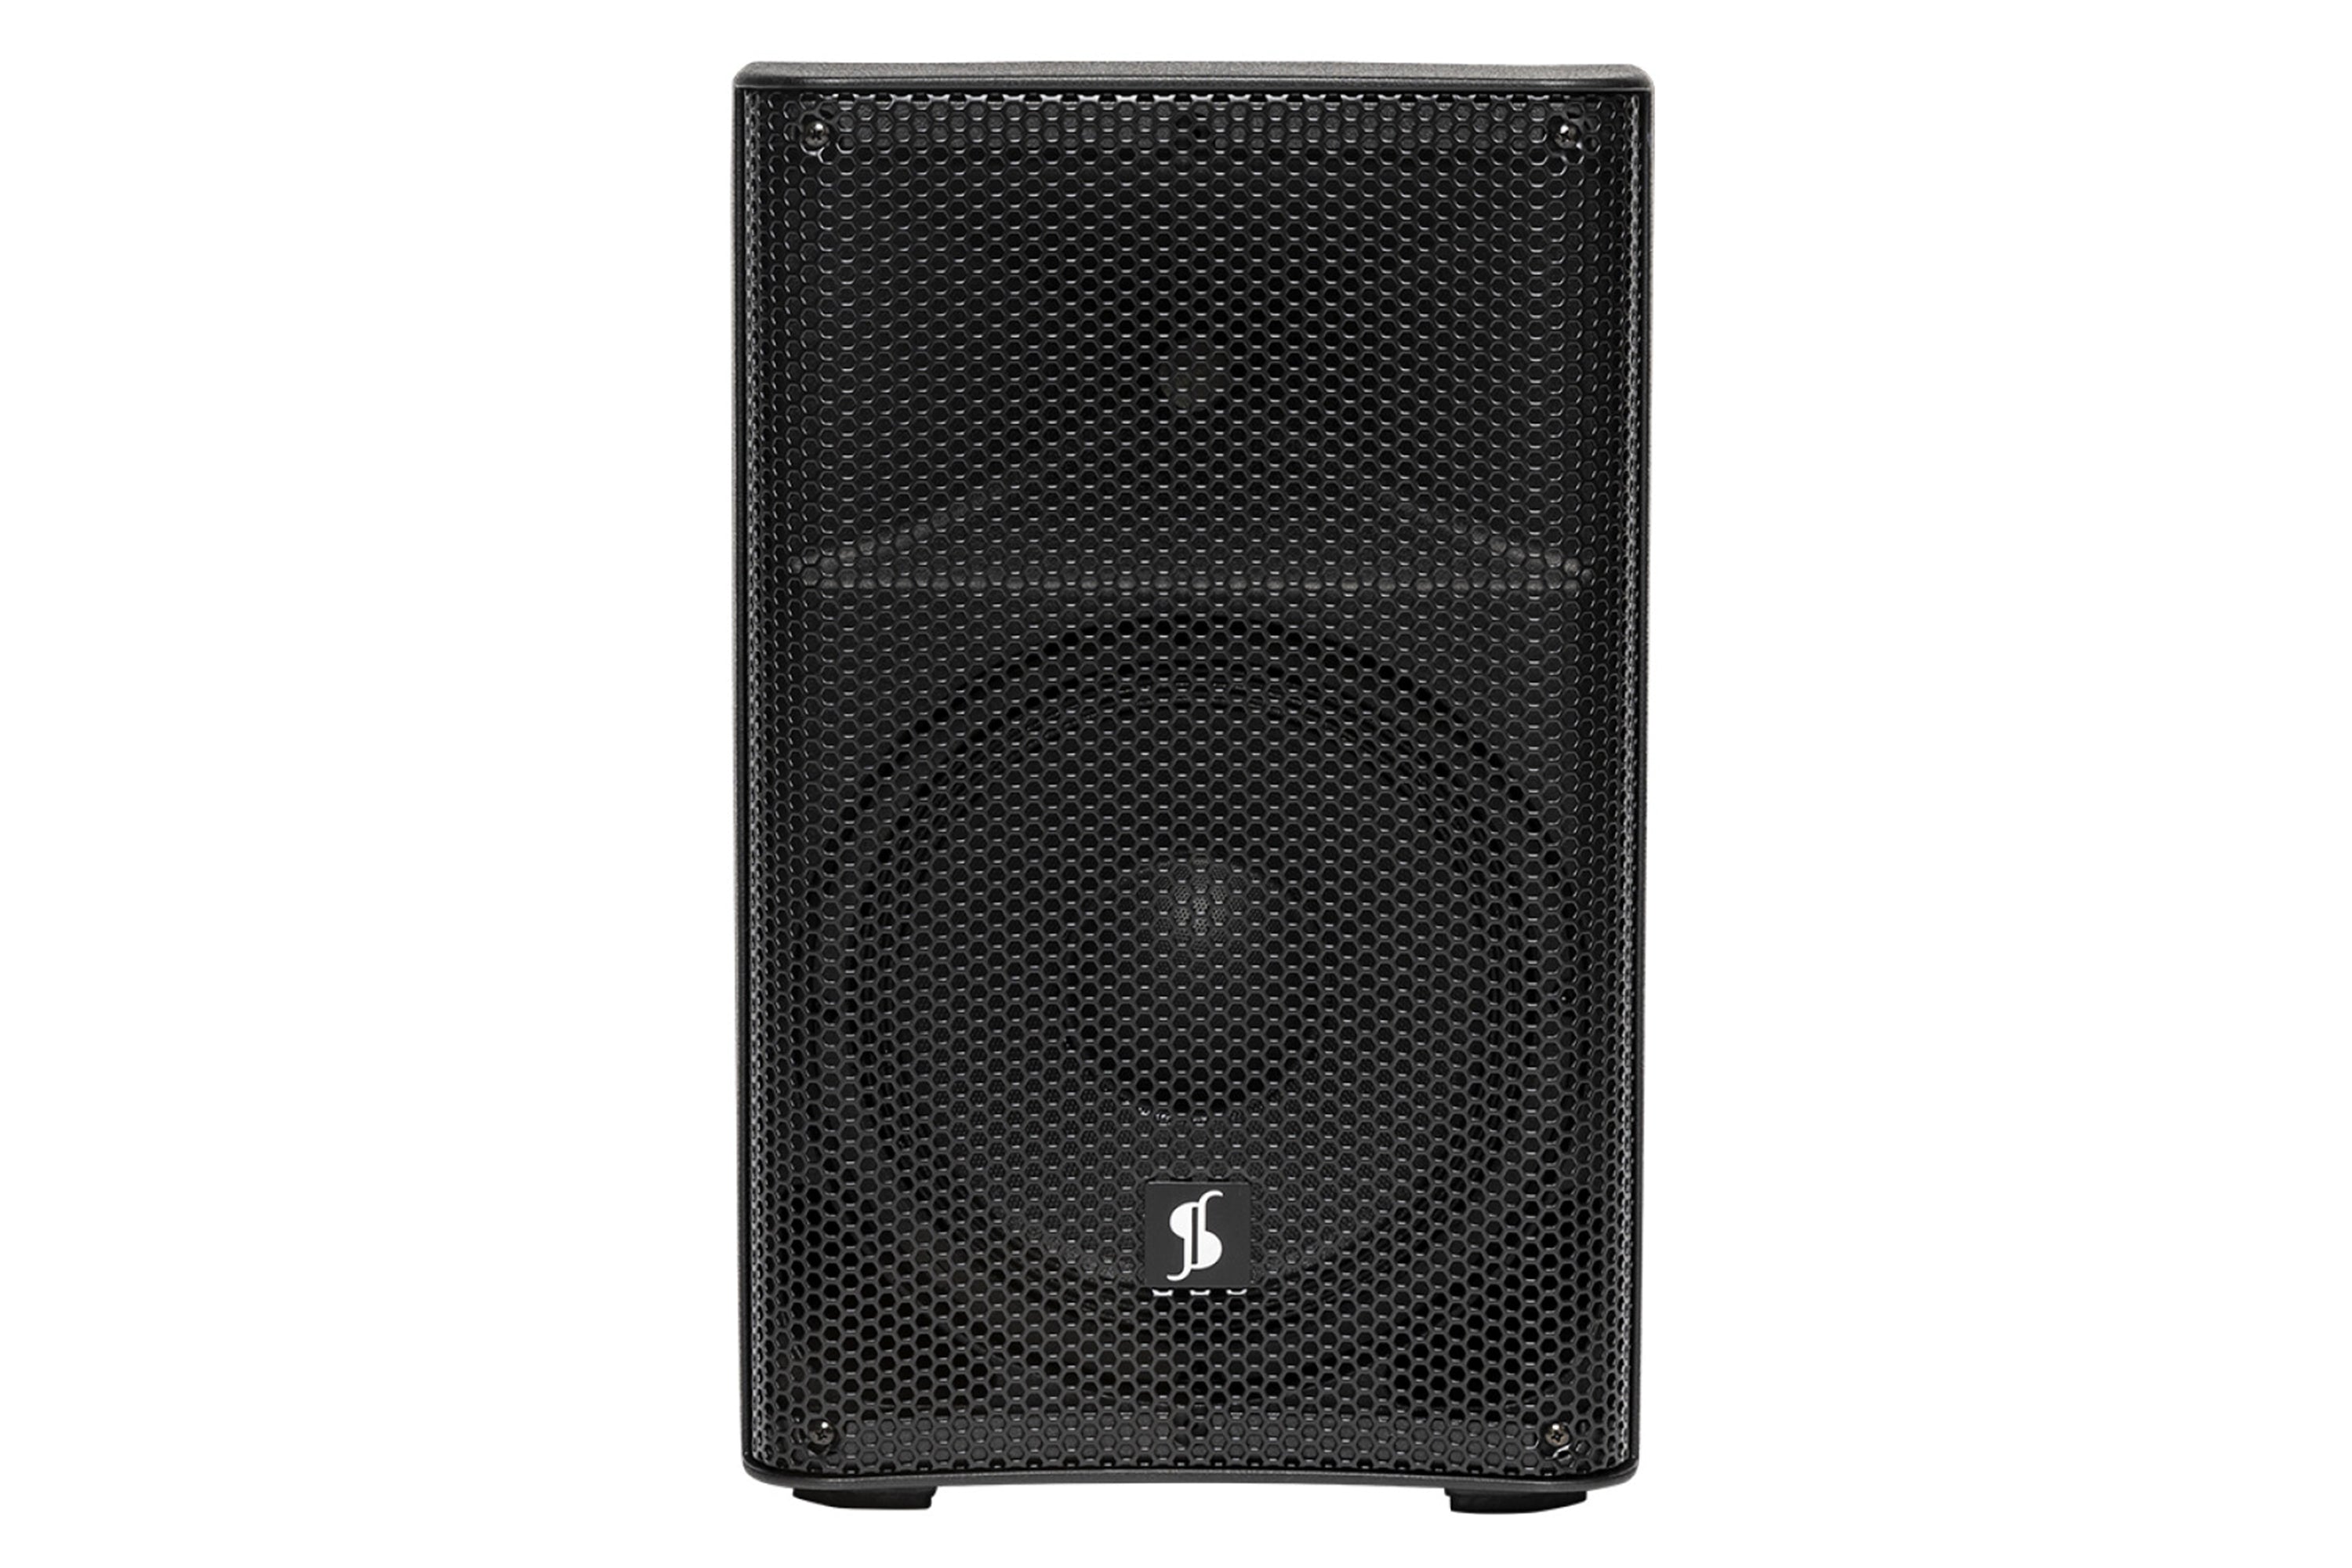 Stagg AS10 US 2-Way Active Speaker